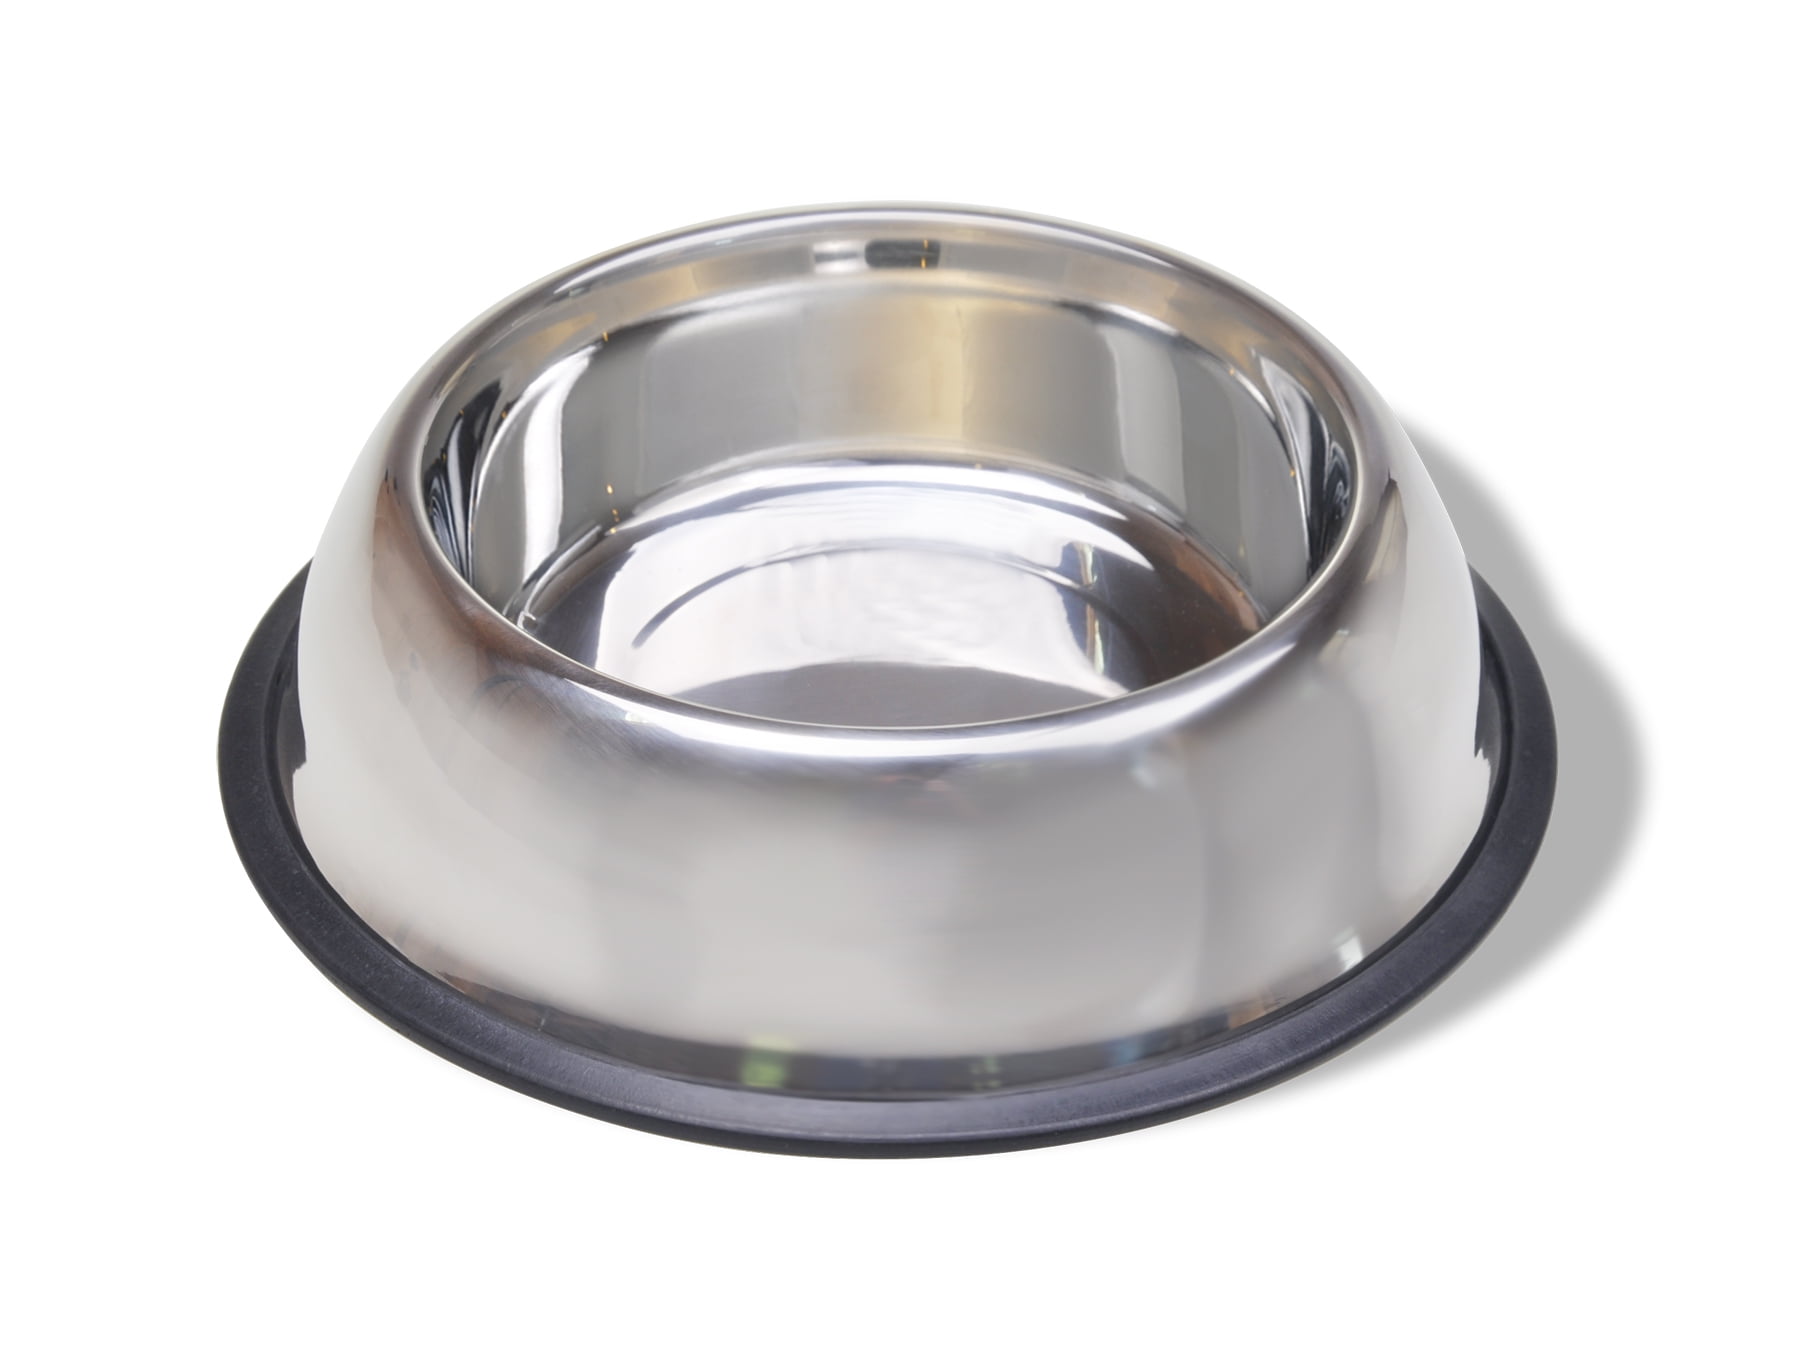 Small Stainless Steel No-Tip Dog Food & Water Bowl #8302 -- approx